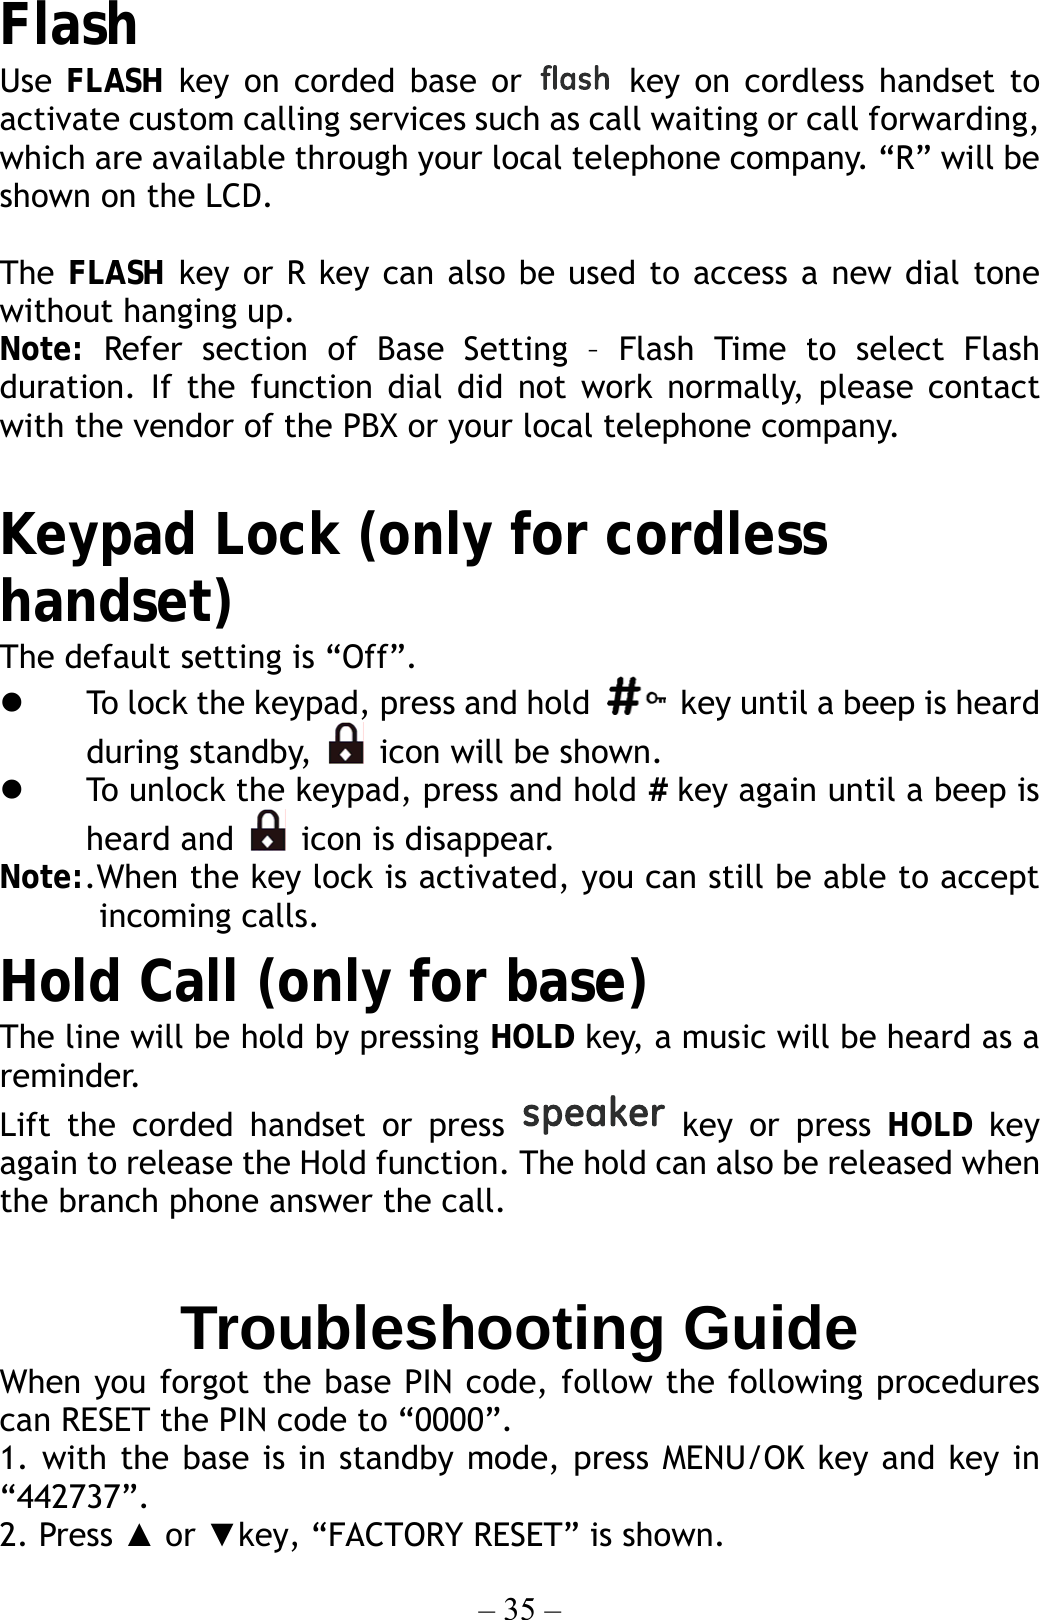 – 35 – Flash Use FLASH key on corded base or   key on cordless handset to activate custom calling services such as call waiting or call forwarding, which are available through your local telephone company. “R” will be shown on the LCD.  The FLASH key or R key can also be used to access a new dial tone without hanging up. Note:  Refer section of Base Setting – Flash Time to select Flash duration. If the function dial did not work normally, please contact with the vendor of the PBX or your local telephone company.    Keypad Lock (only for cordless handset) The default setting is “Off”.   To lock the keypad, press and hold    key until a beep is heard during standby,    icon will be shown.     To unlock the keypad, press and hold # key again until a beep is heard and   icon is disappear. Note:.When the key lock is activated, you can still be able to accept incoming calls. Hold Call (only for base) The line will be hold by pressing HOLD key, a music will be heard as a reminder. Lift the corded handset or press   key or press HOLD key again to release the Hold function. The hold can also be released when the branch phone answer the call.  Troubleshooting Guide When you forgot the base PIN code, follow the following procedures can RESET the PIN code to “0000”. 1. with the base is in standby mode, press MENU/OK key and key in “442737”. 2. Press ▲ or ▼key, “FACTORY RESET” is shown. 